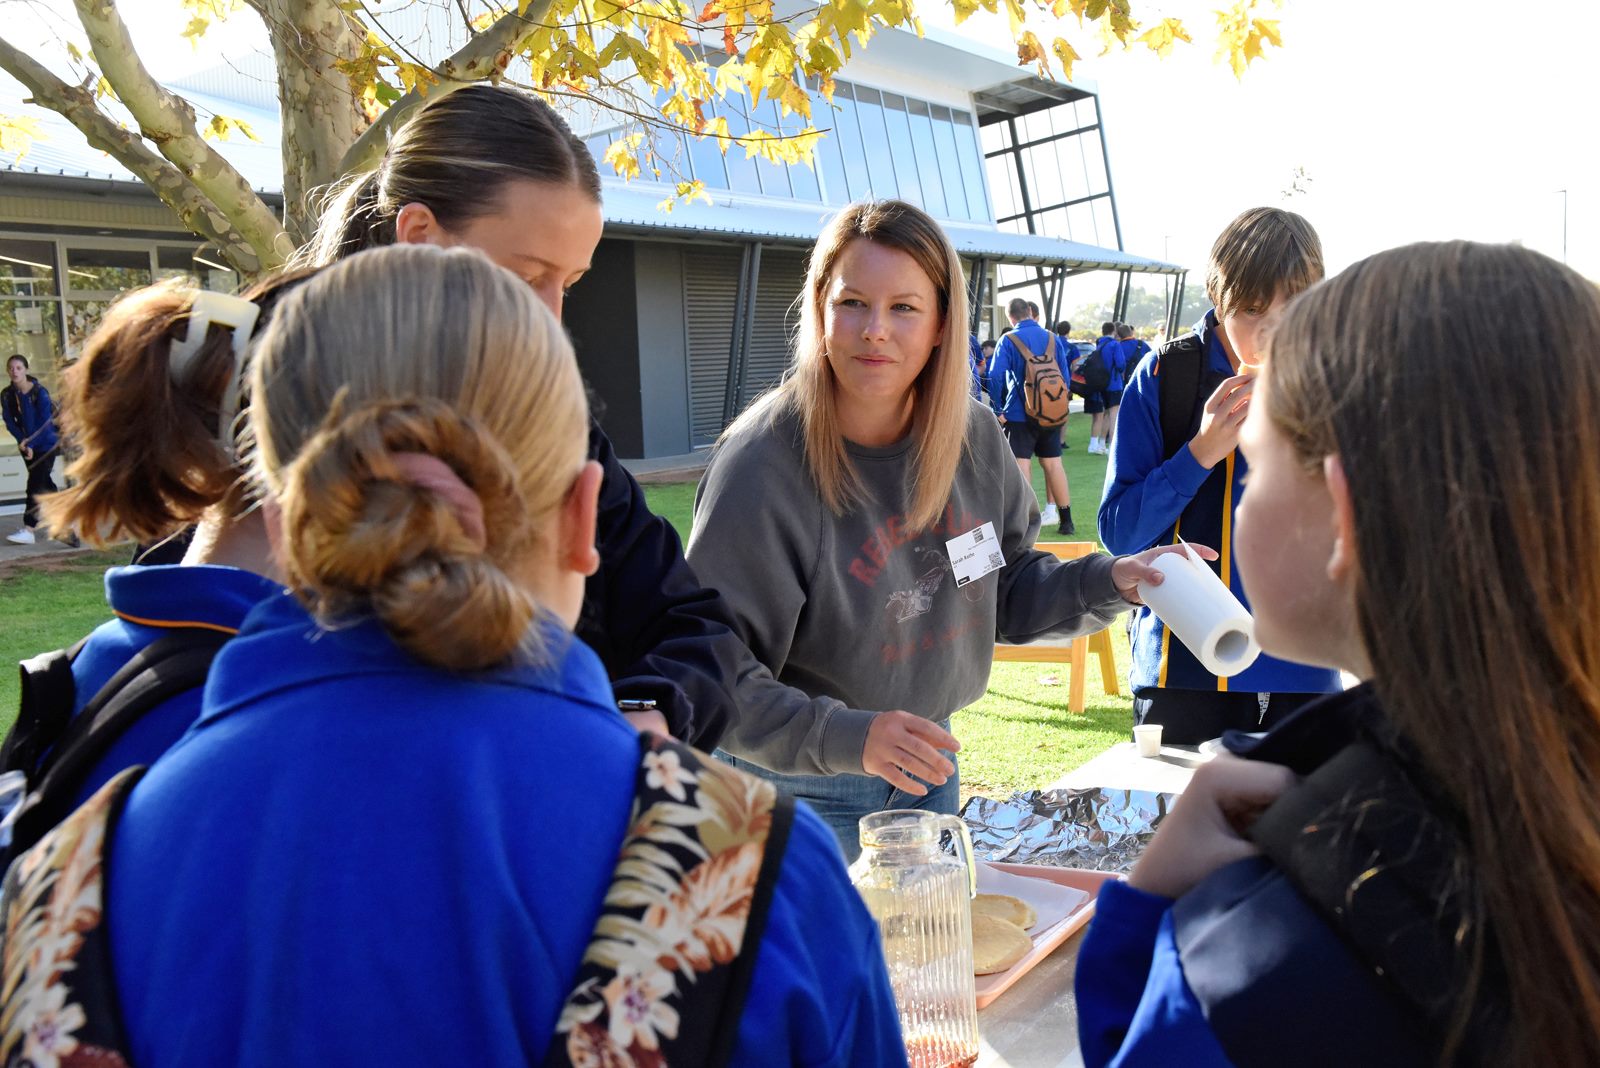 An adult volunteer at a school fair outside with some students, getting pancakes ready.